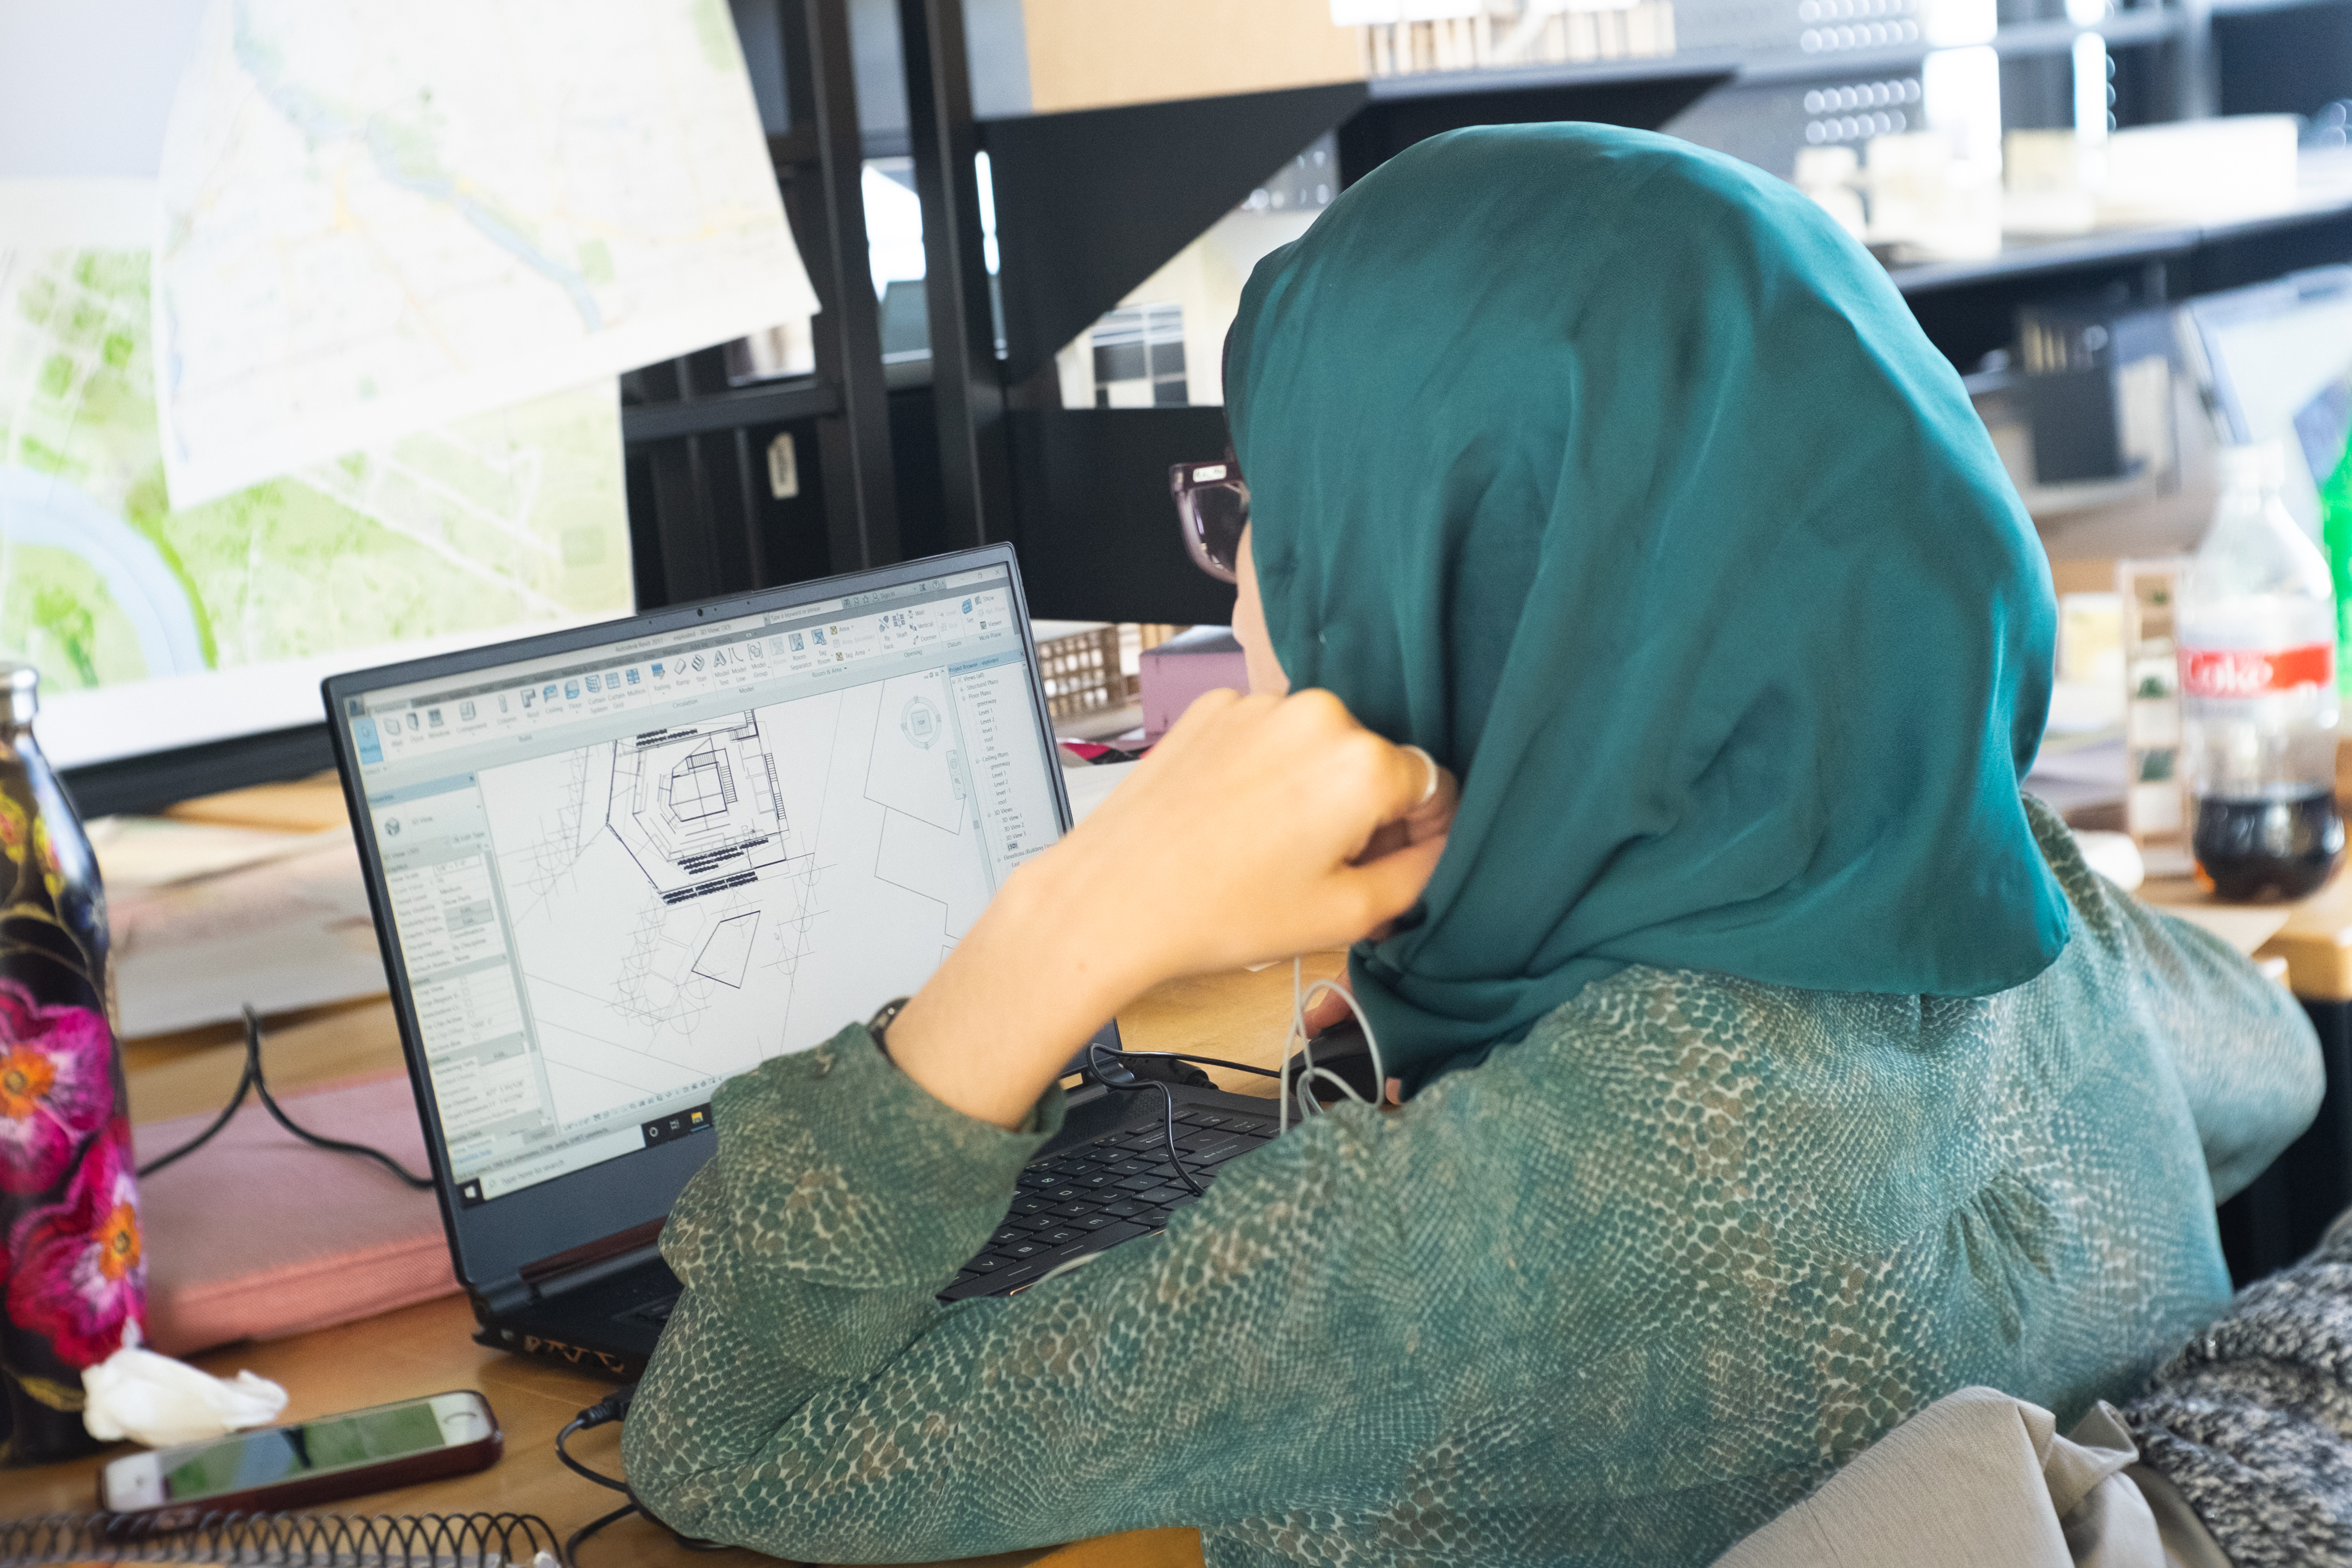 Student working on an architecture project on her computer in the studio space